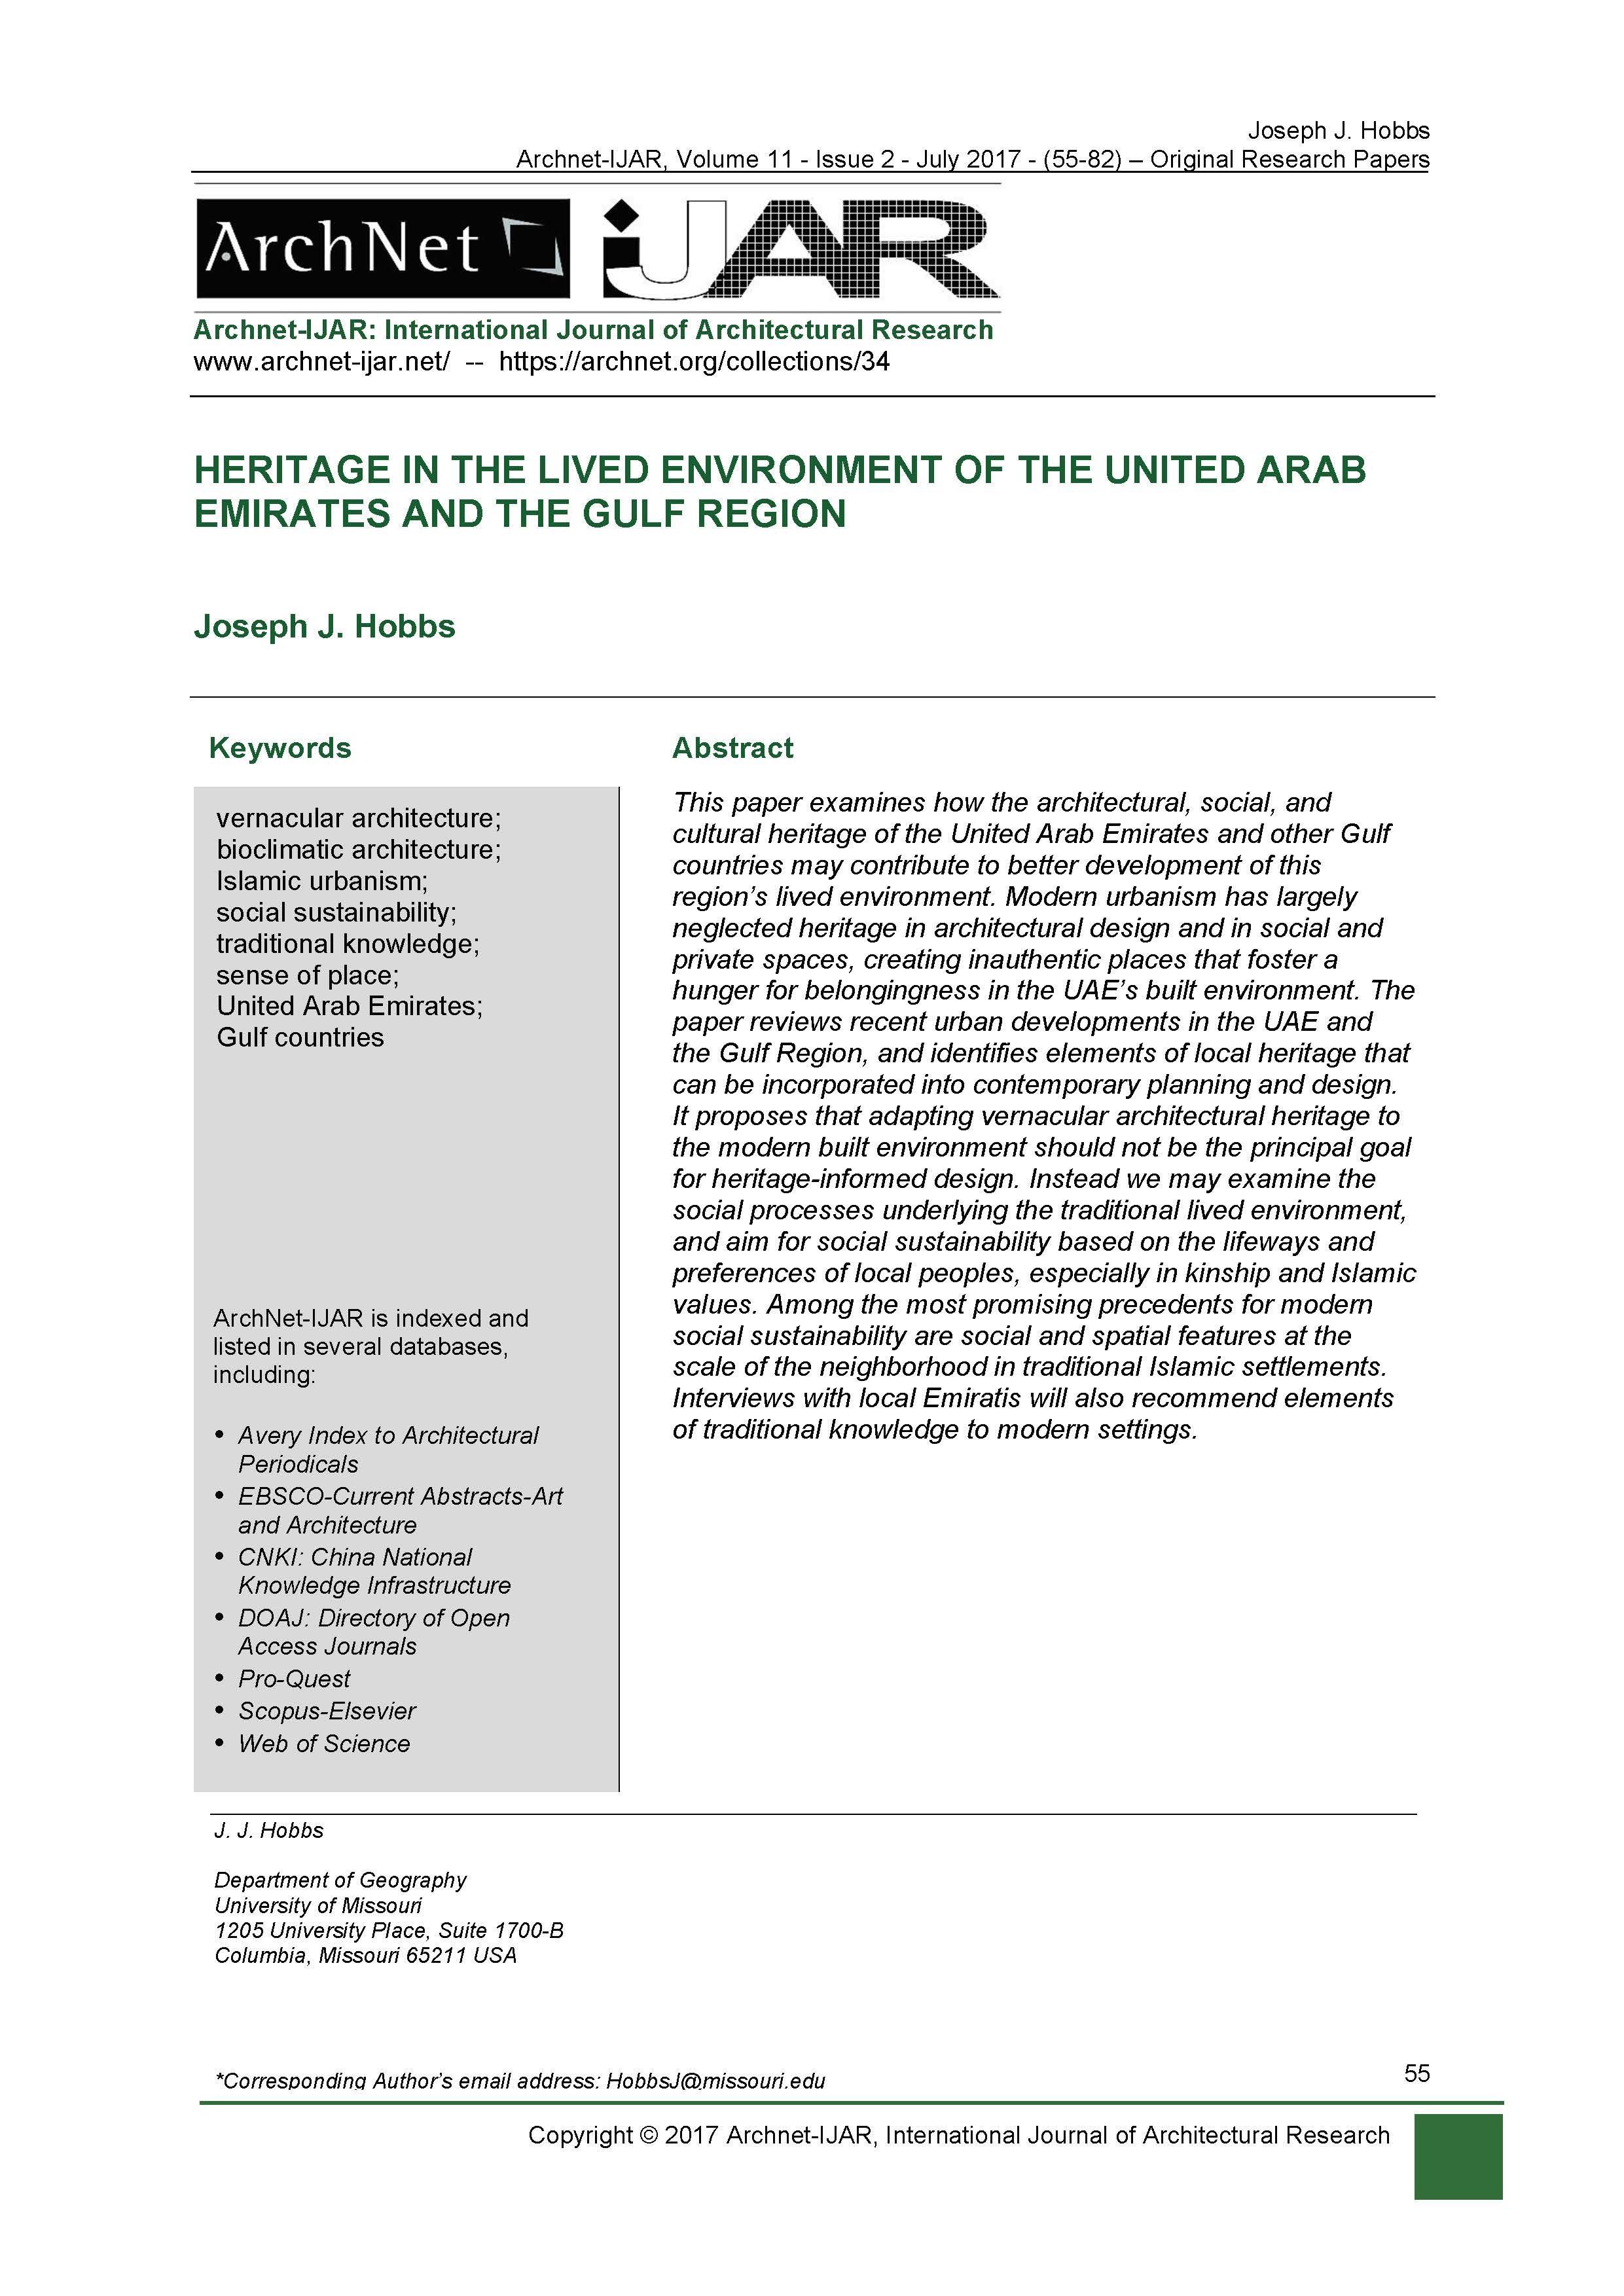 Joseph John Hobbs - <div style="text-align: justify; ">This paper examines how the architectural, social, and cultural heritage of the&nbsp;United Arab Emirates and other Gulf countries may contribute to better development of this region’s lived environment. Modern urbanism has largely neglected heritage in architectural design and in social and private spaces, creating inauthentic places that foster a hunger for belongingness in the UAE’s built environment. The paper reviews recent urban developments in the UAE and the Gulf Region, and identifies elements of local heritage that can be incorporated into contemporary planning and design. It proposes that adapting vernacular architectural heritage to the modern built environment should not be the principal goal for heritage-informed design. Instead we may examine the social processes underlying the traditional lived environment, and aim for social sustainability based on the lifeways and preferences of local peoples, especially in kinship and Islamic values. Among the most promising precedents for modern social sustainability are social and spatial features at the scale of the neighborhood in traditional Islamic settlements. Interviews with local Emiratis will also recommend elements of traditional knowledge to modern settings.&nbsp;<br></div><div><span style="text-align: left;"><br></span></div><div style="text-align: justify; "><span style="text-align: left; font-weight: bold;">Keywords:</span></div><div style="text-align: justify; "><span style="text-align: left; font-weight: bold;"><br></span></div><div style=""><span style="text-align: left;">vernacular architecture; bioclimatic architecture; Islamic urbanism; social sustainability; traditional knowledge; sense of place; United Arab Emirates; Gulf countries</span><span style="text-align: left;"><br></span></div><div style="" keywords<="" h4=""><div style=""><br></div></div><div style="text-align: justify; "><span style="text-align: left;"><br></span></div>